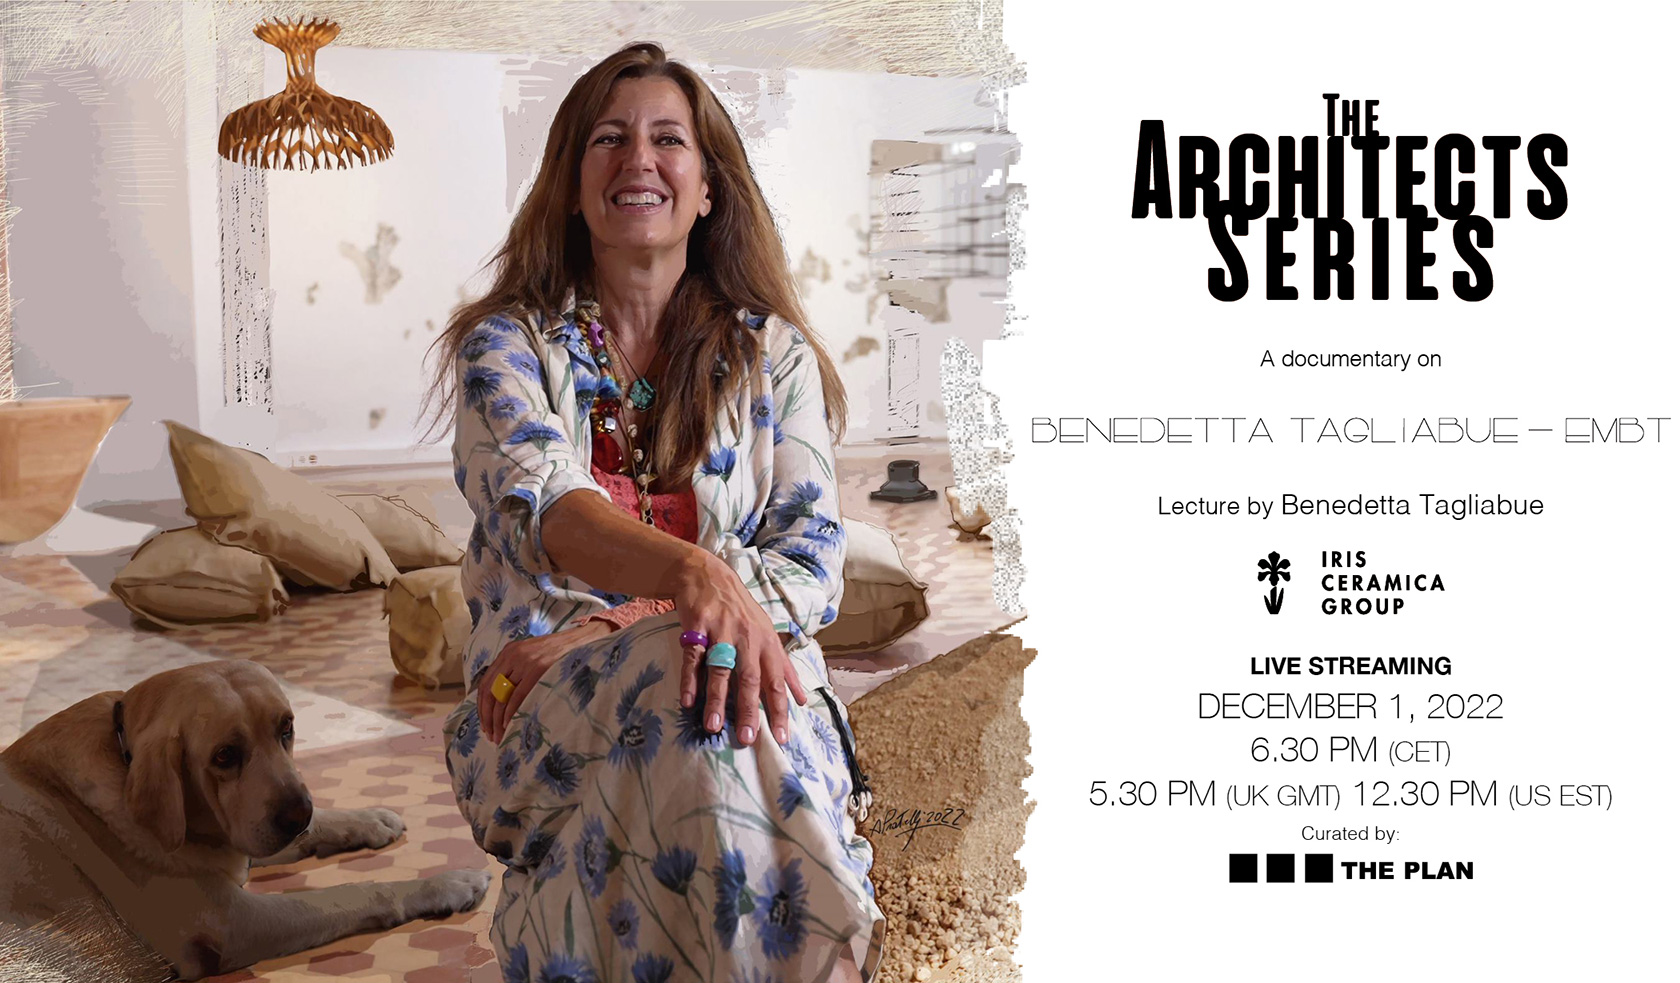 THE ARCHITECTS SERIES - A DOCUMENTARY ON: BENEDETTA TAGLIABUE - EMBT ARCHITECTS